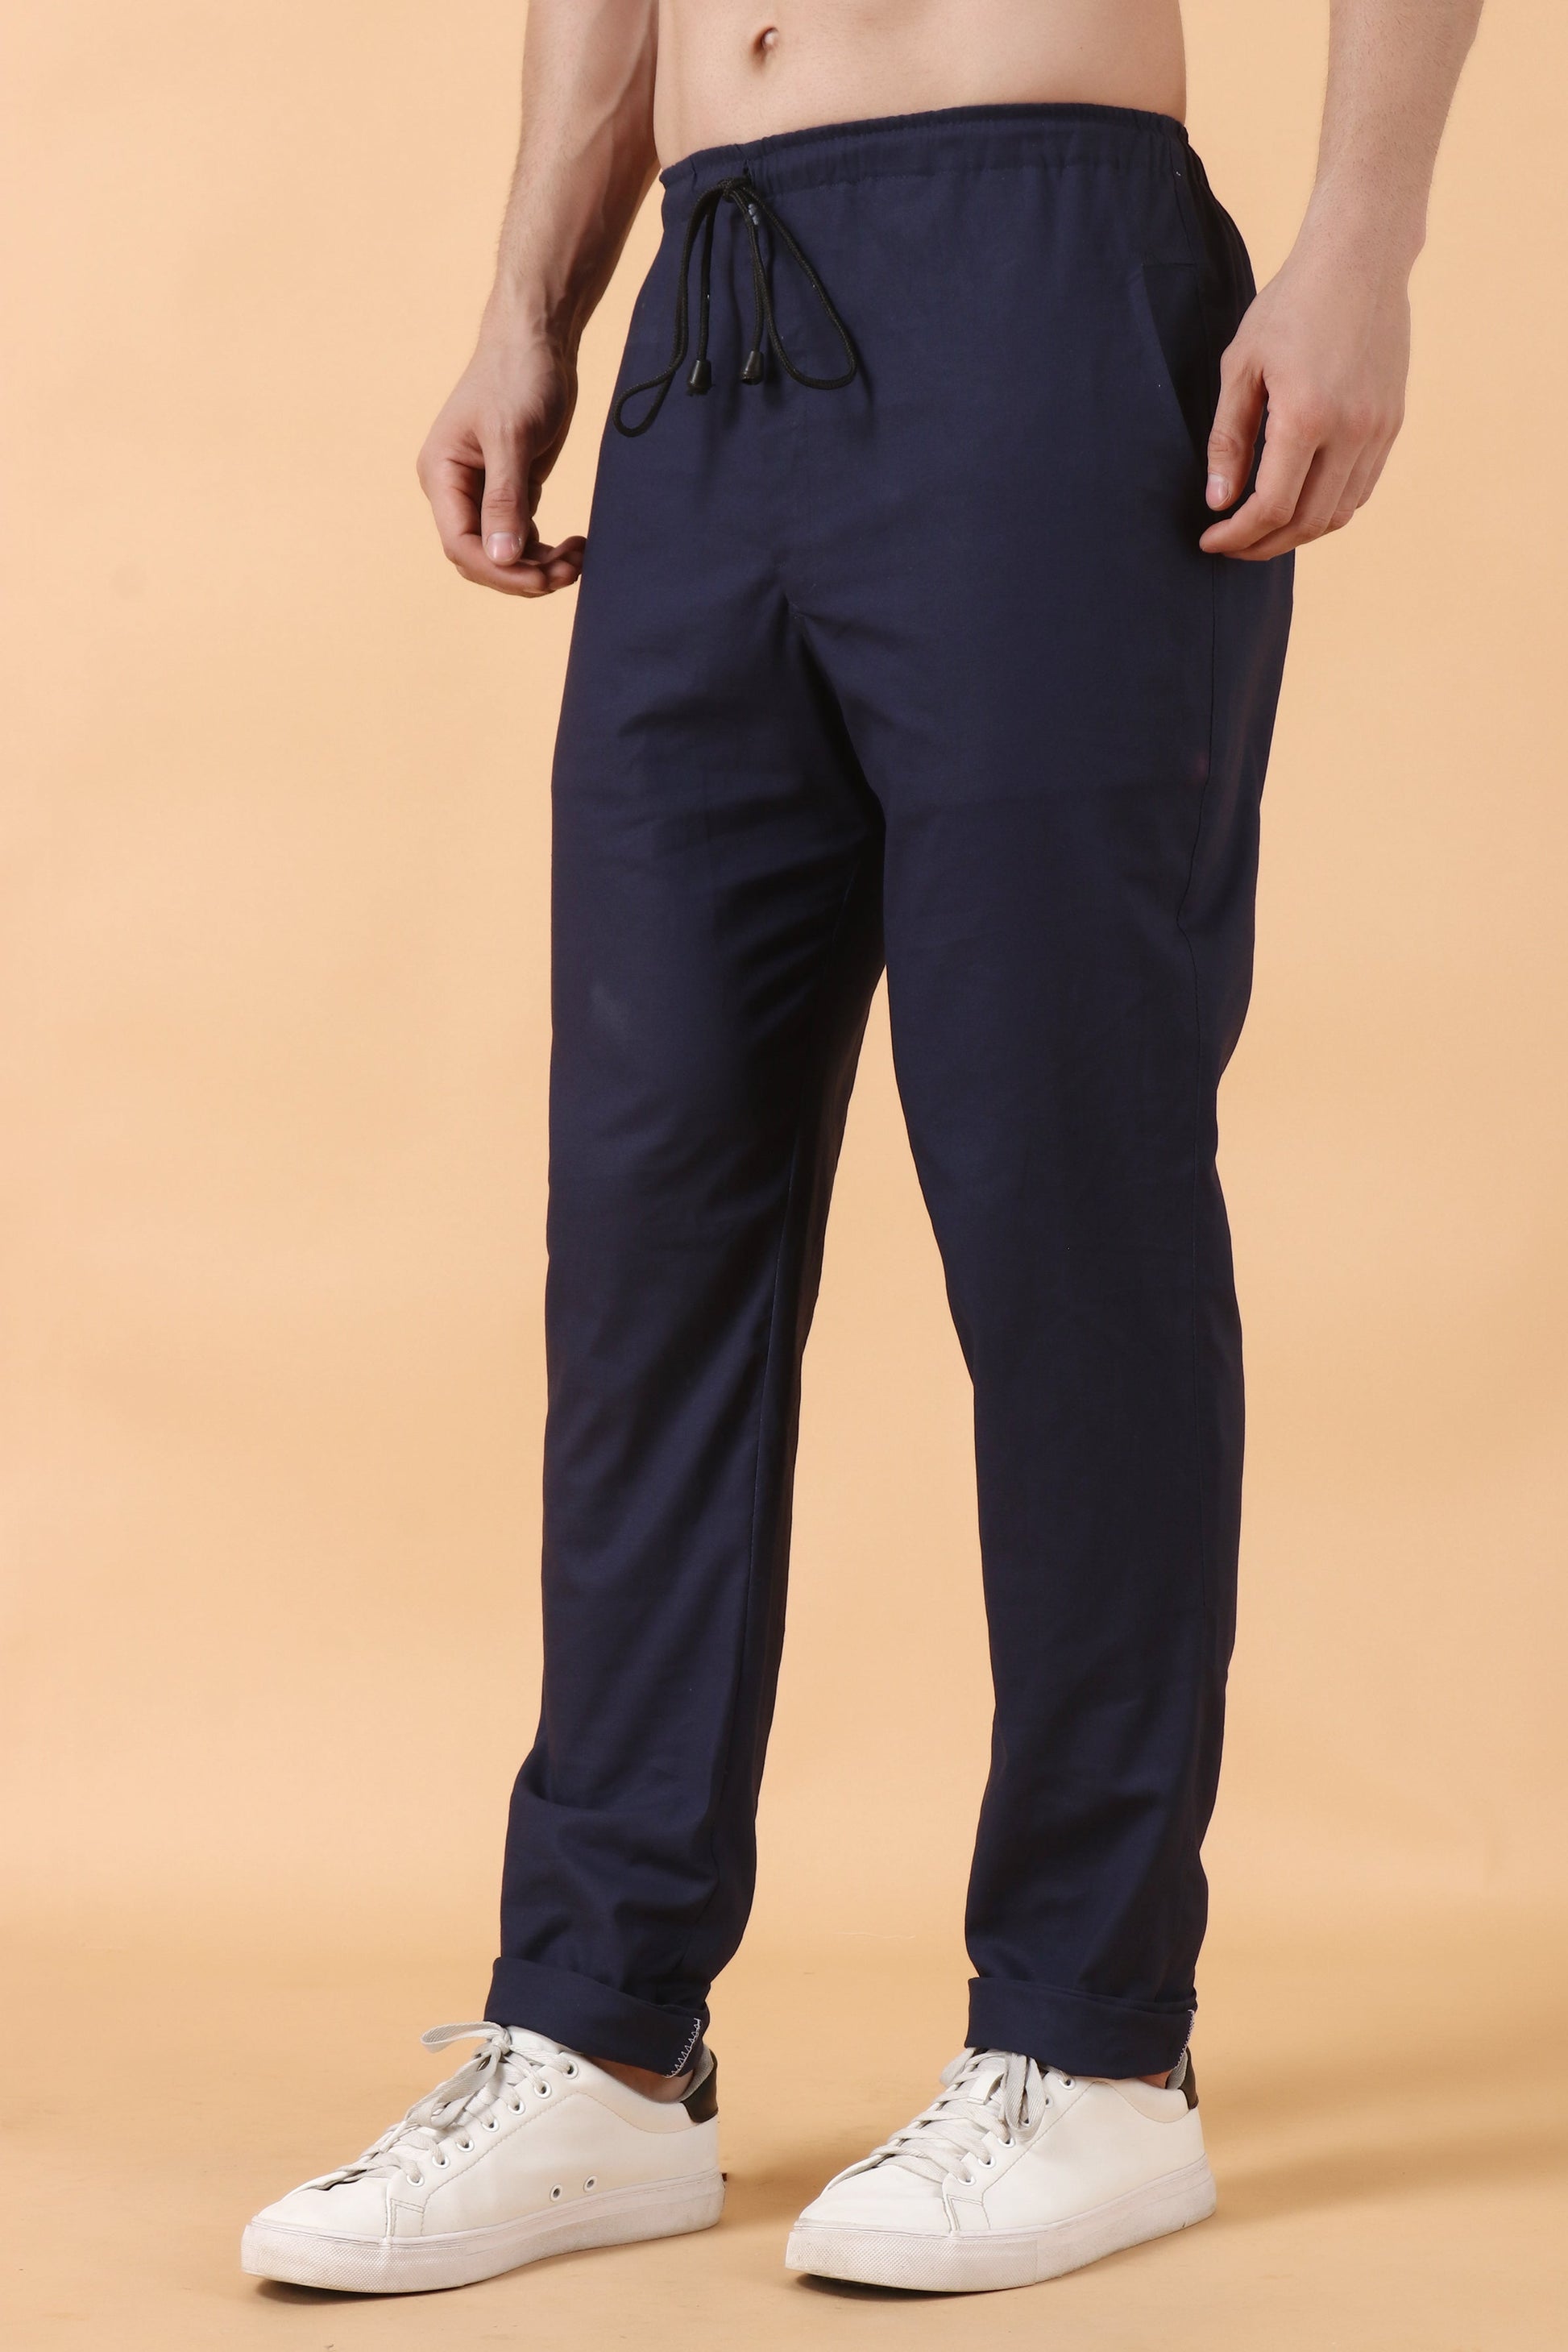 All Size, Cotton, Cotton Pant, Double Pockets, Drawstring, Dual Pockets, Elastic, Elasticized Cotton Pant, Navy Blue, Navy Blue Cotton Pant, Navy Blue Pant, Plus Size, Two Side Pockets